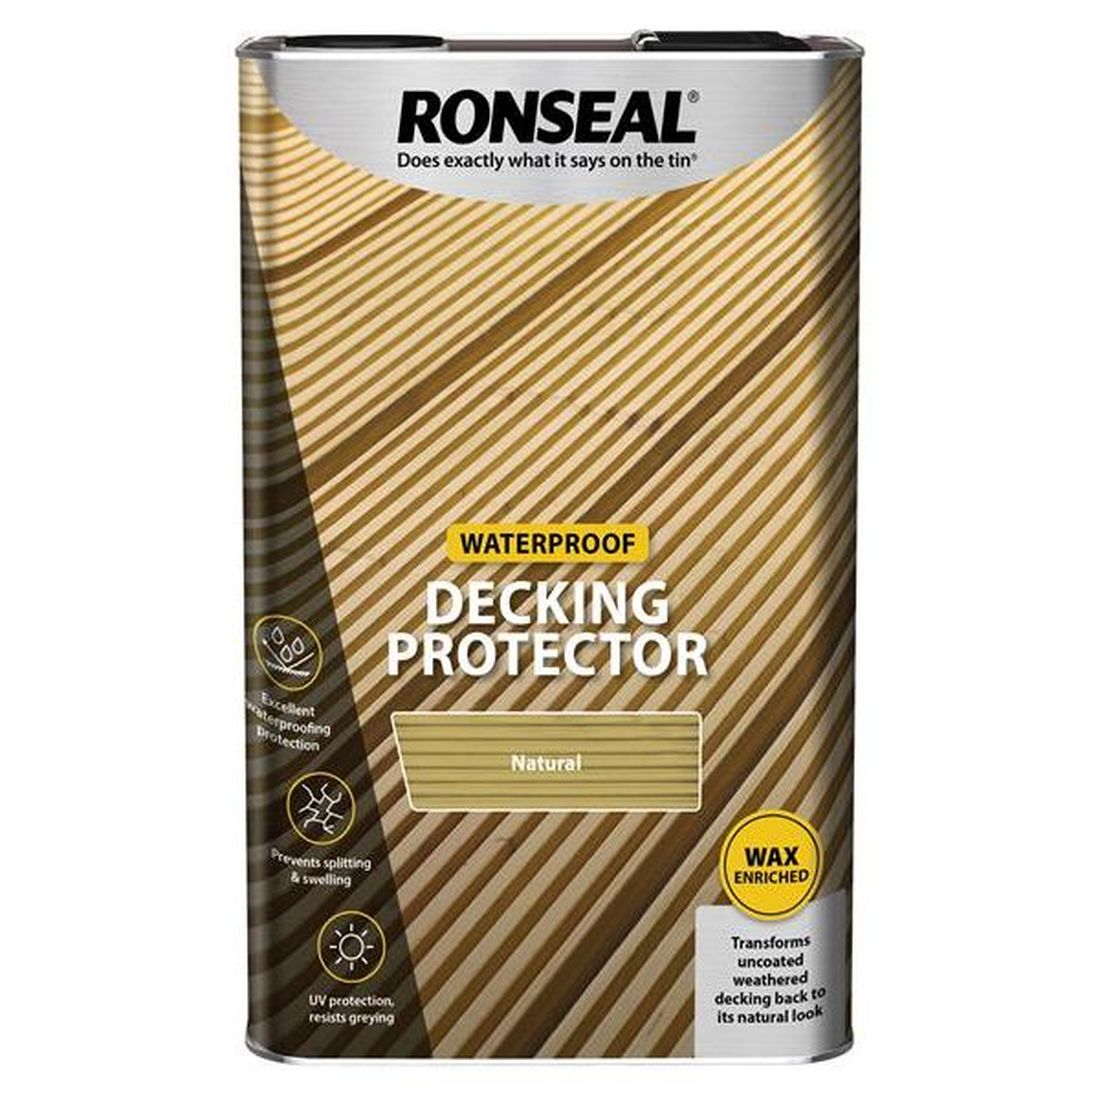 Ronseal Decking Protector Natural 5 litre 